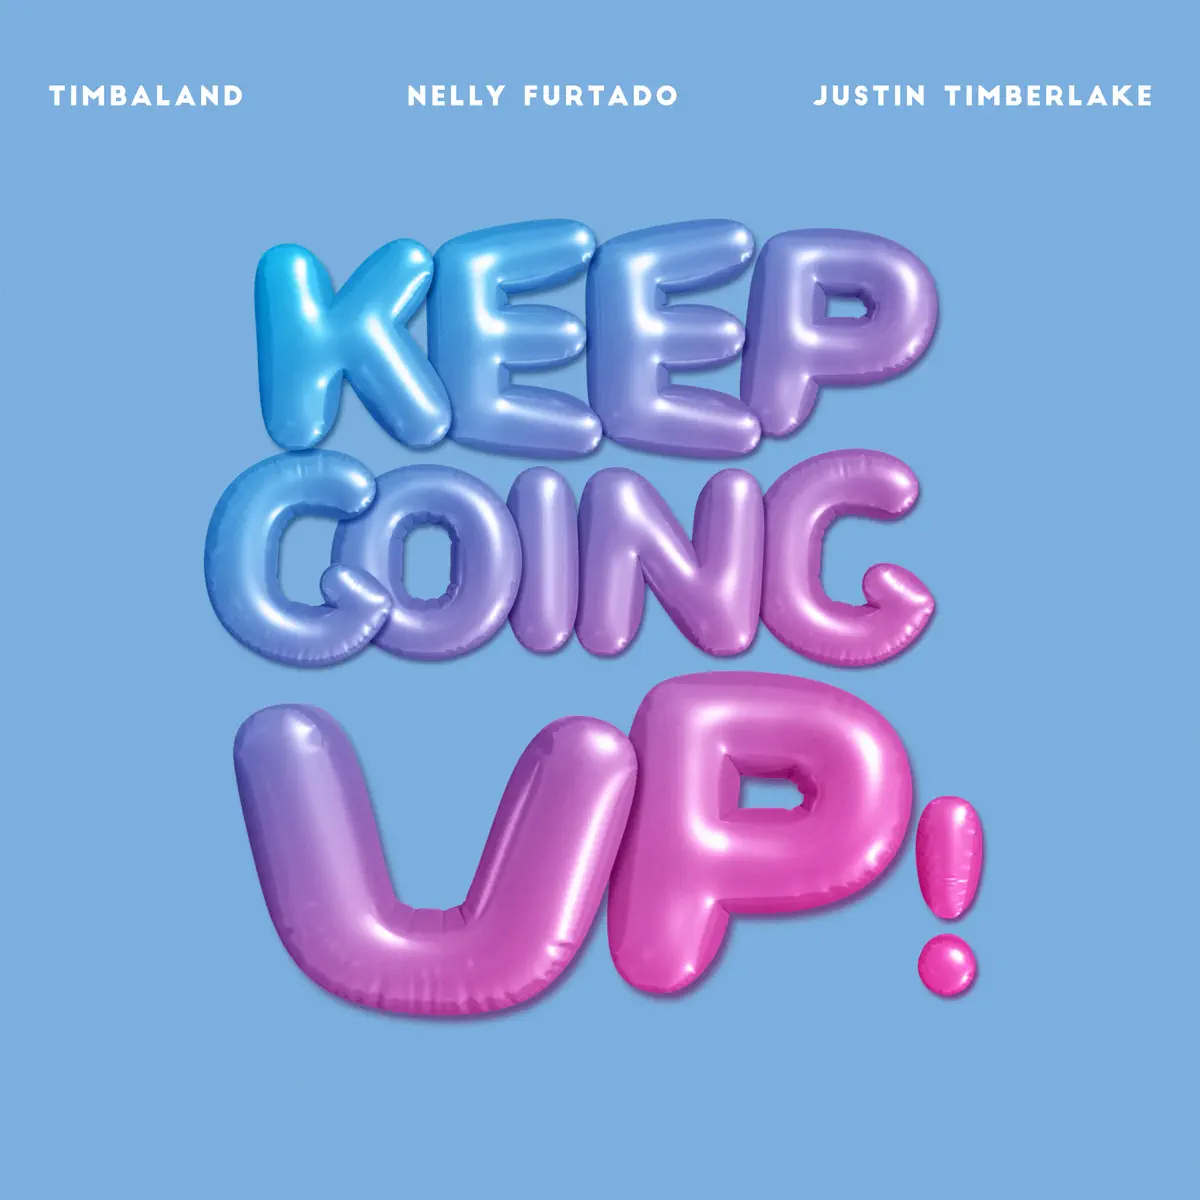 Timbaland - Keep Going Up (feat. Nelly Furtado & Justin Timberlake) - Single (2023) [iTunes Plus AAC M4A]-新房子